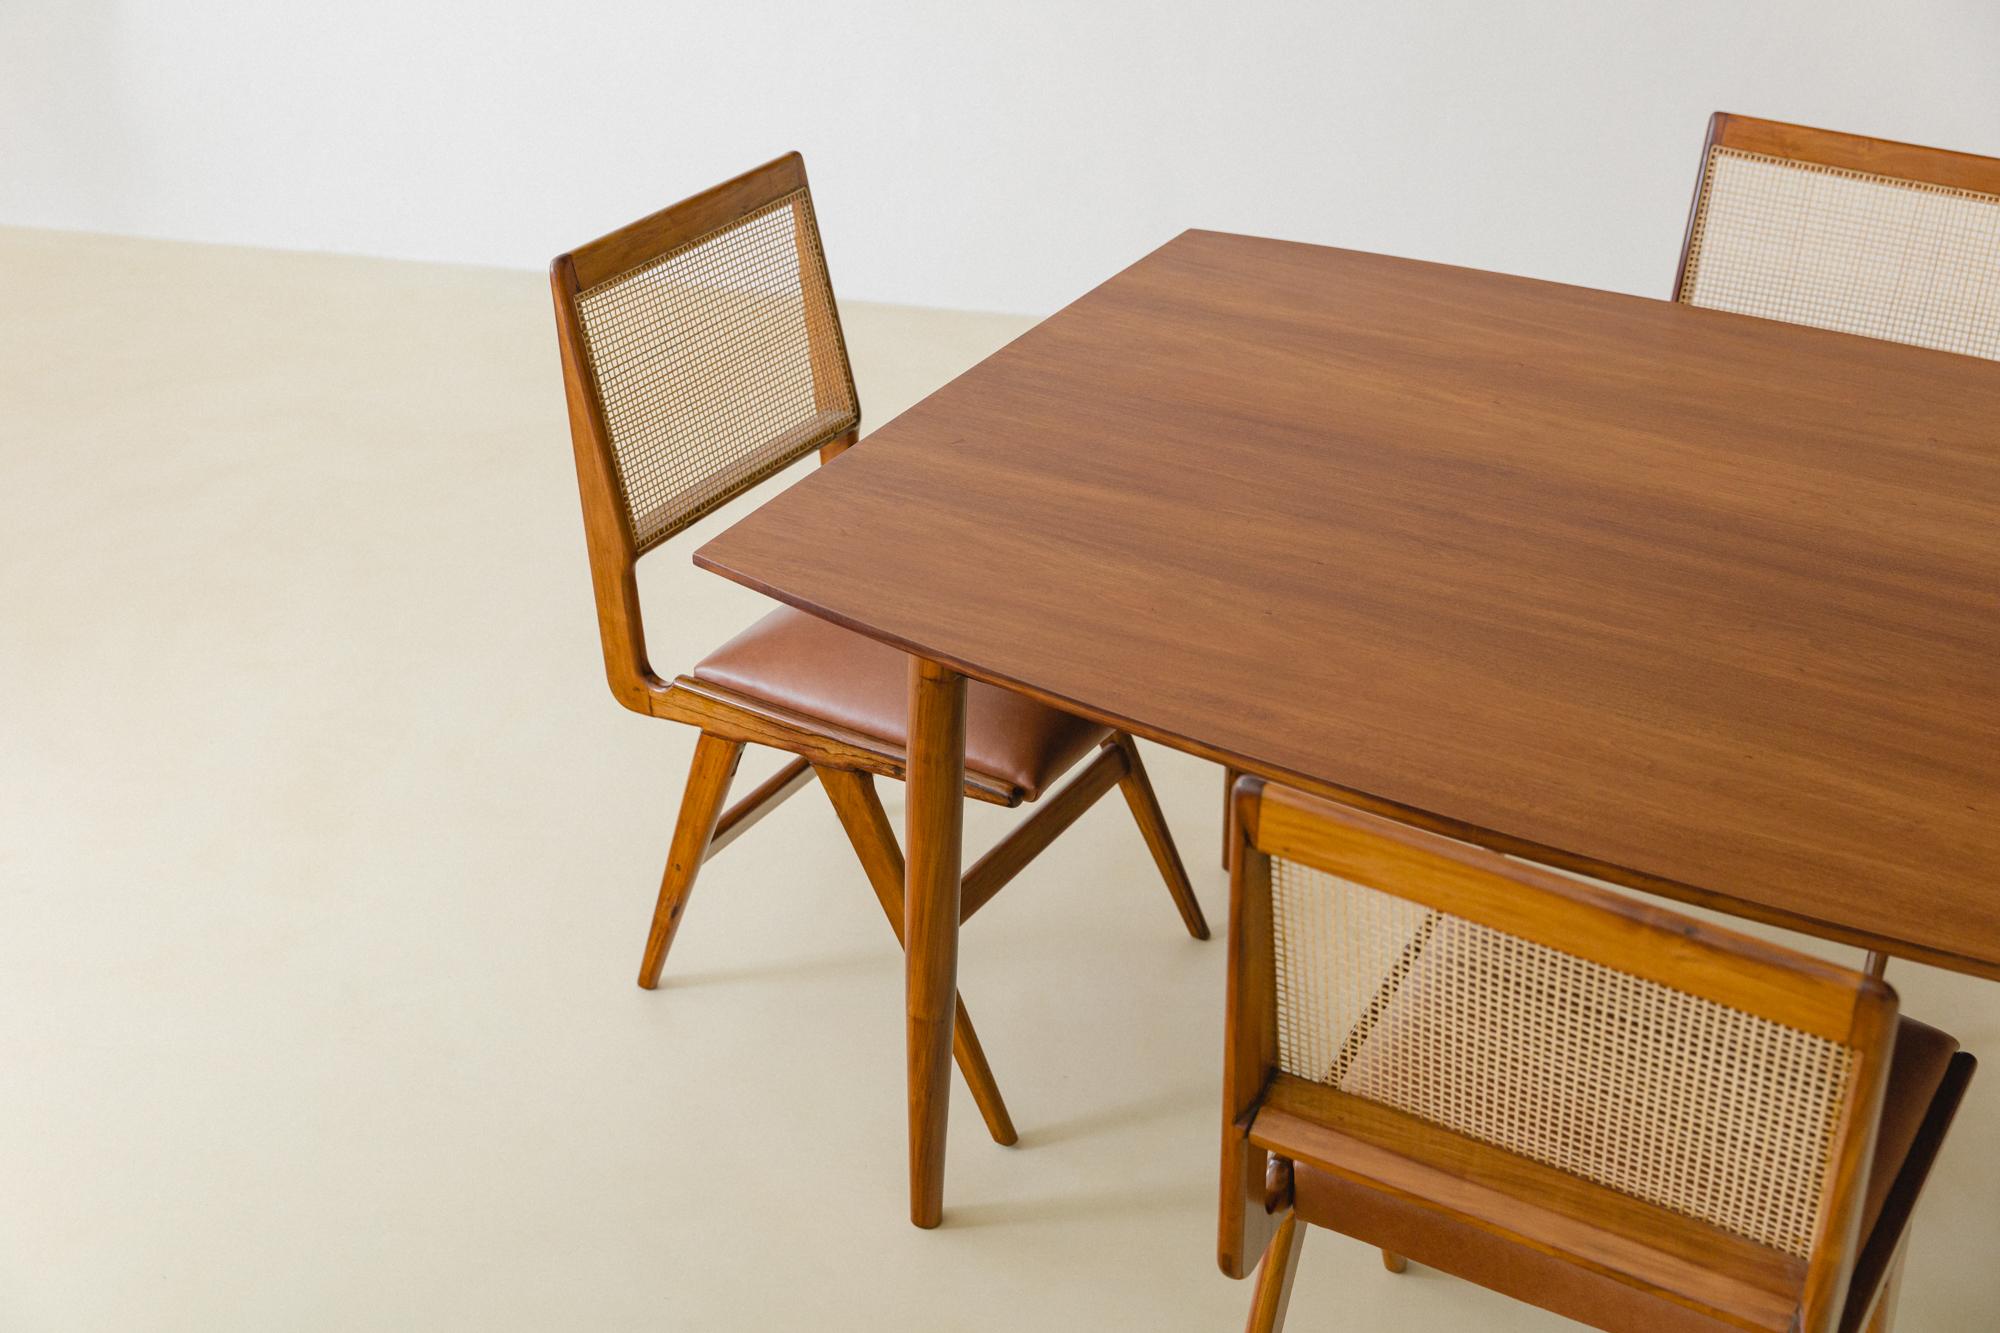 Expandable Dining Table in Caviuna by Carlo Hauner, Brazilian Midcentury, 1950s For Sale 4